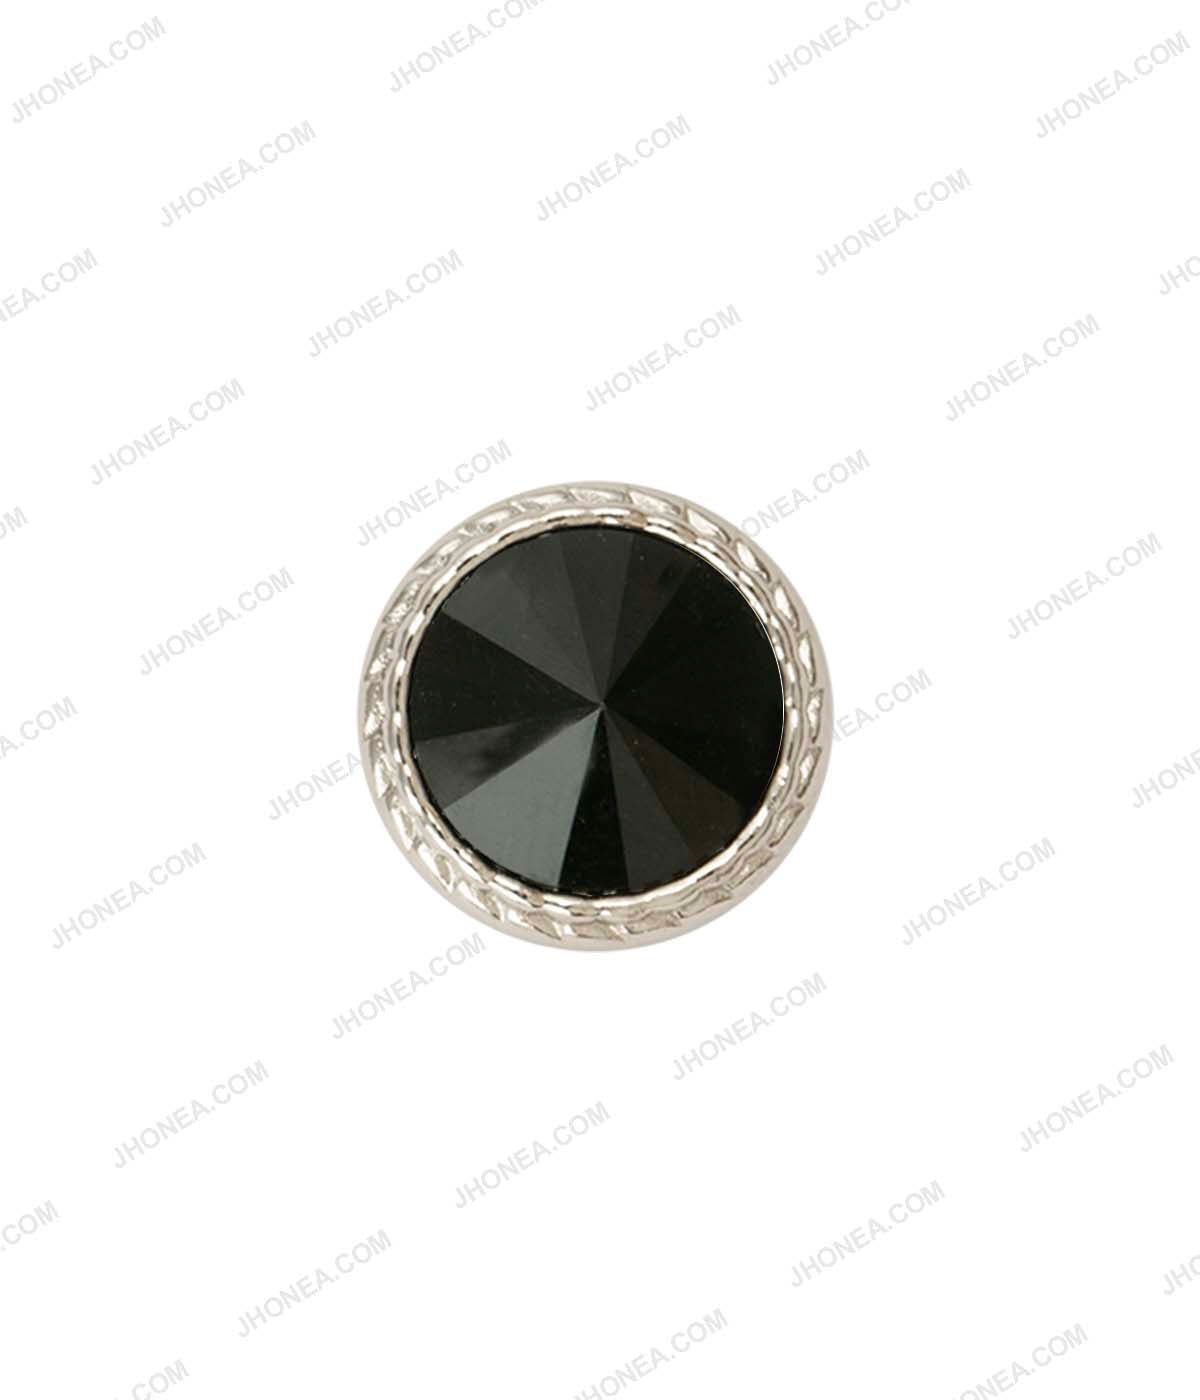 Shiny Silver with Emerald Green Round Cut Diamond Buttons